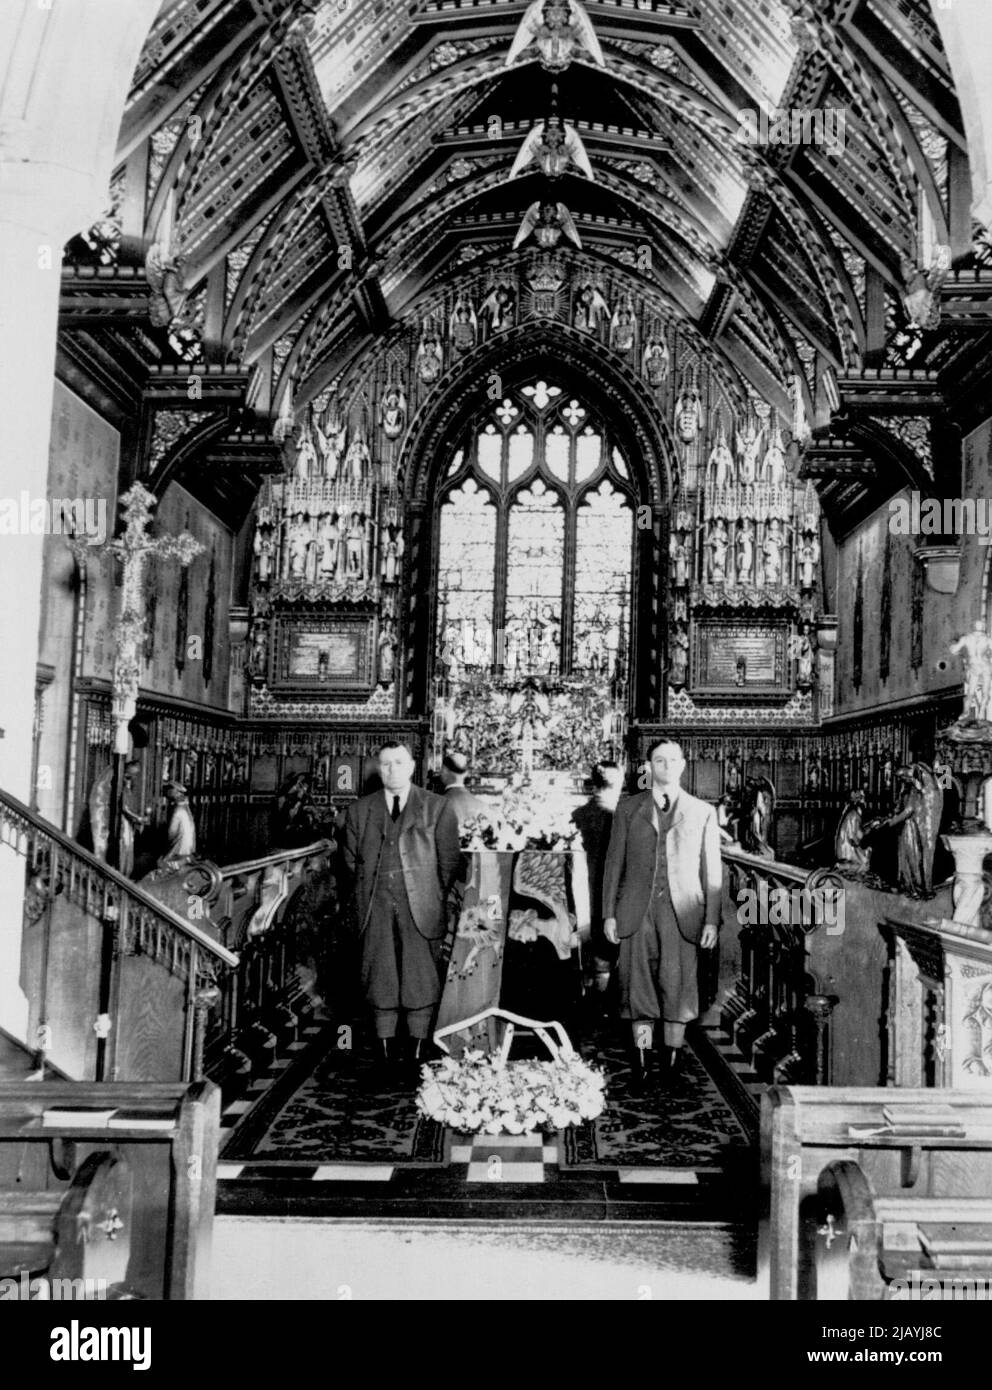 King Lies In State In Sandringham - Casket containing body of King George VI is flanked by four green-jacketed game keepers as it rests in Church of St. Mary Magdalene on royal estate at Sandringham. February 20, 1952. (Photo by AP Wirephoto). Stock Photo